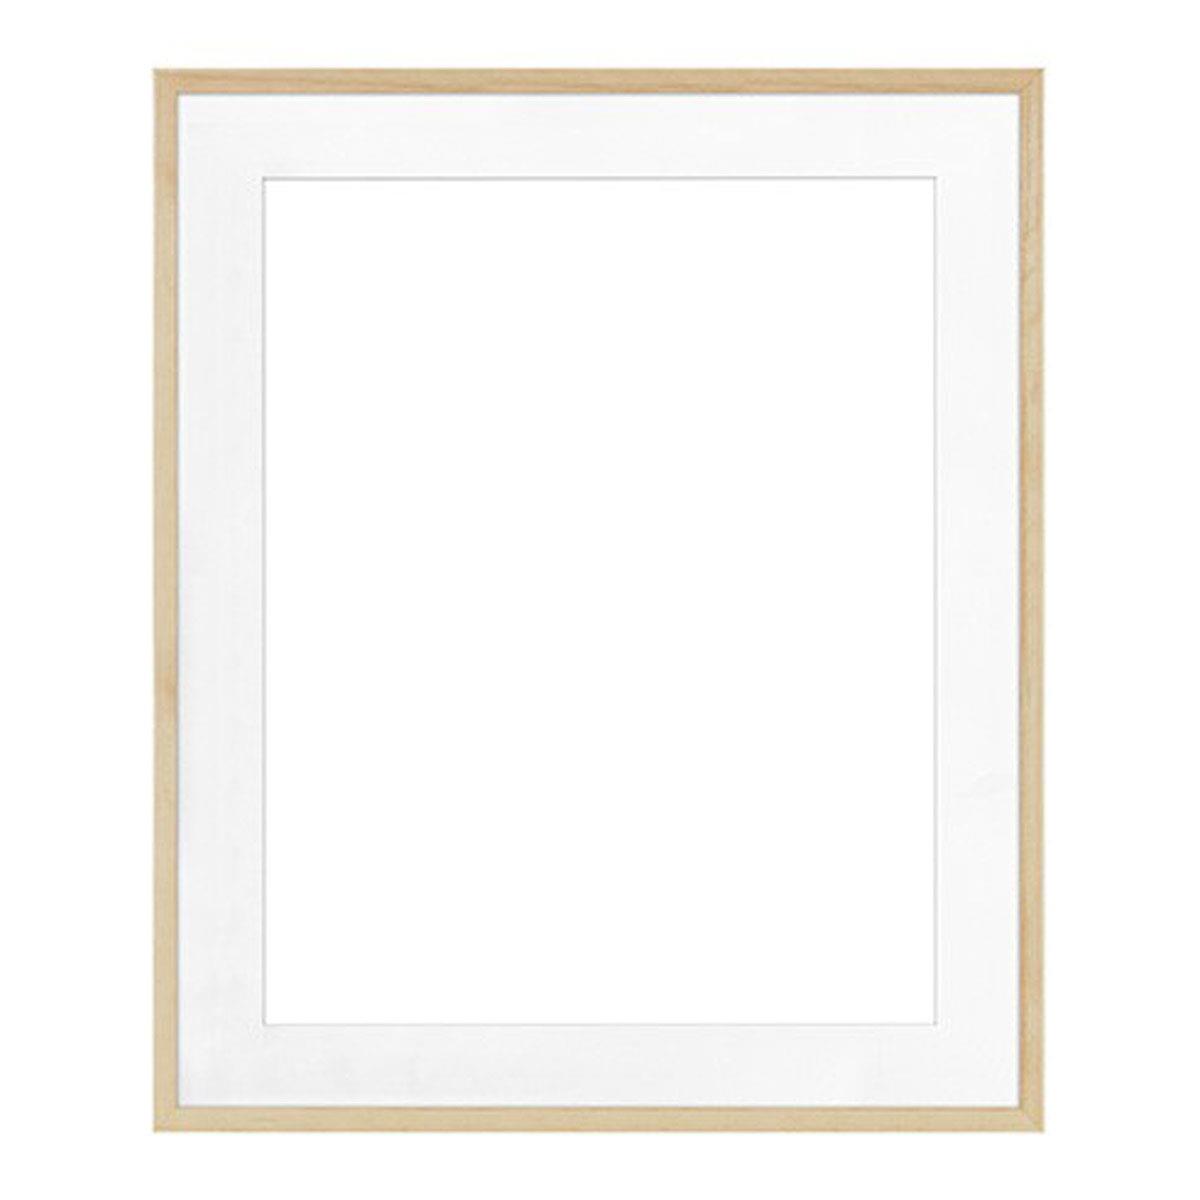 Image of Framatic Woodworks 20x24&quot; Natural Blonde Hardwood Frame for a 16x20&quot; Photograph